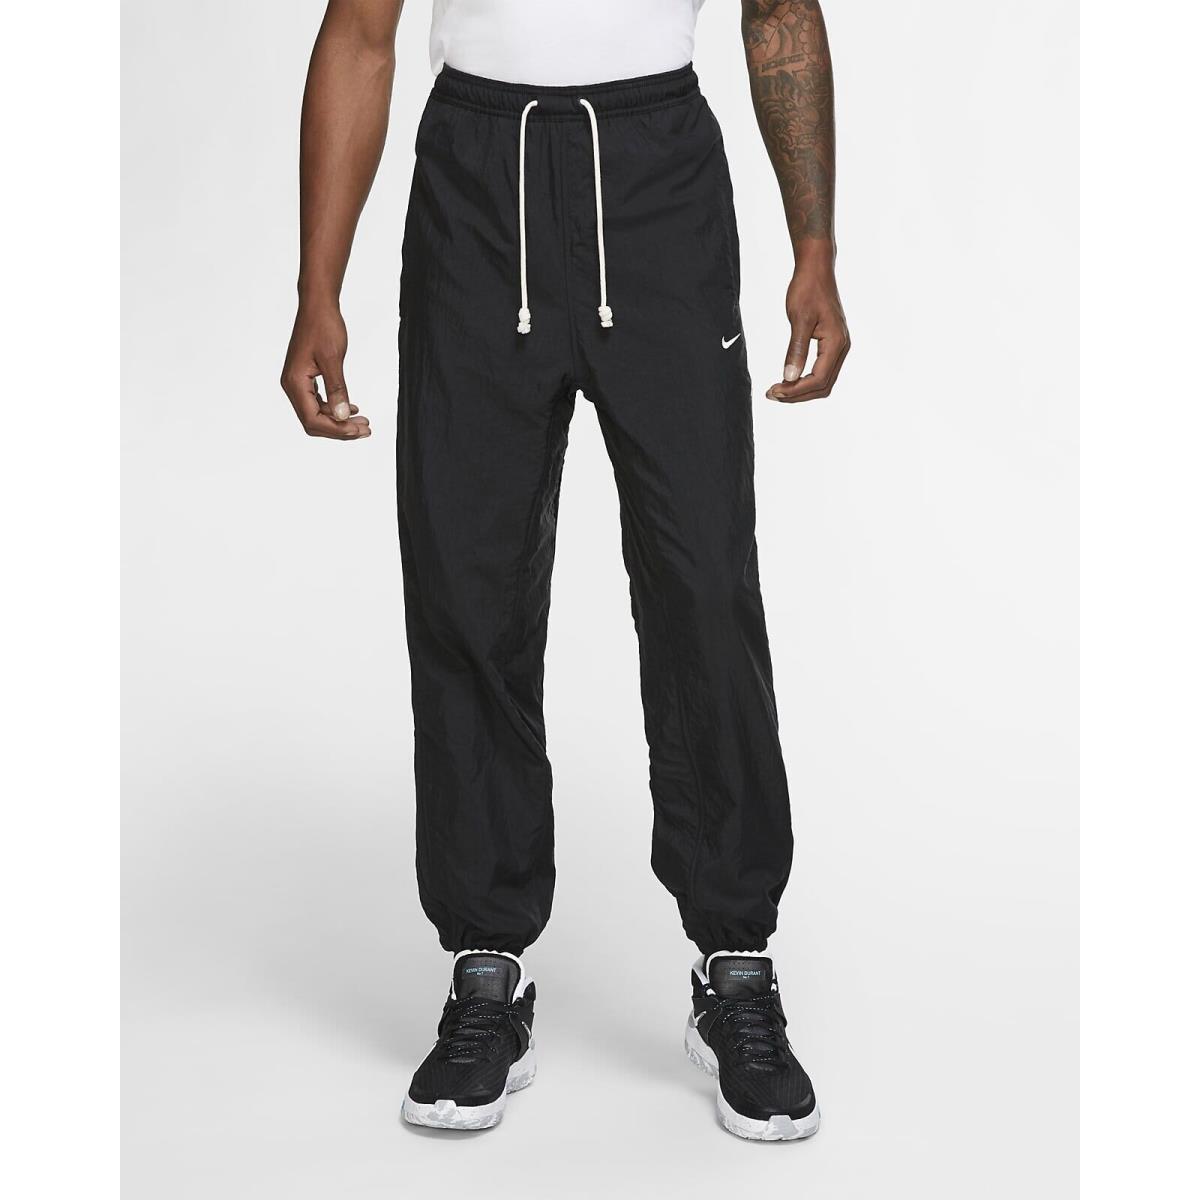 Nike Standard Issue Woven Therma Basketball Pants CK6825-010 Men`s Large L